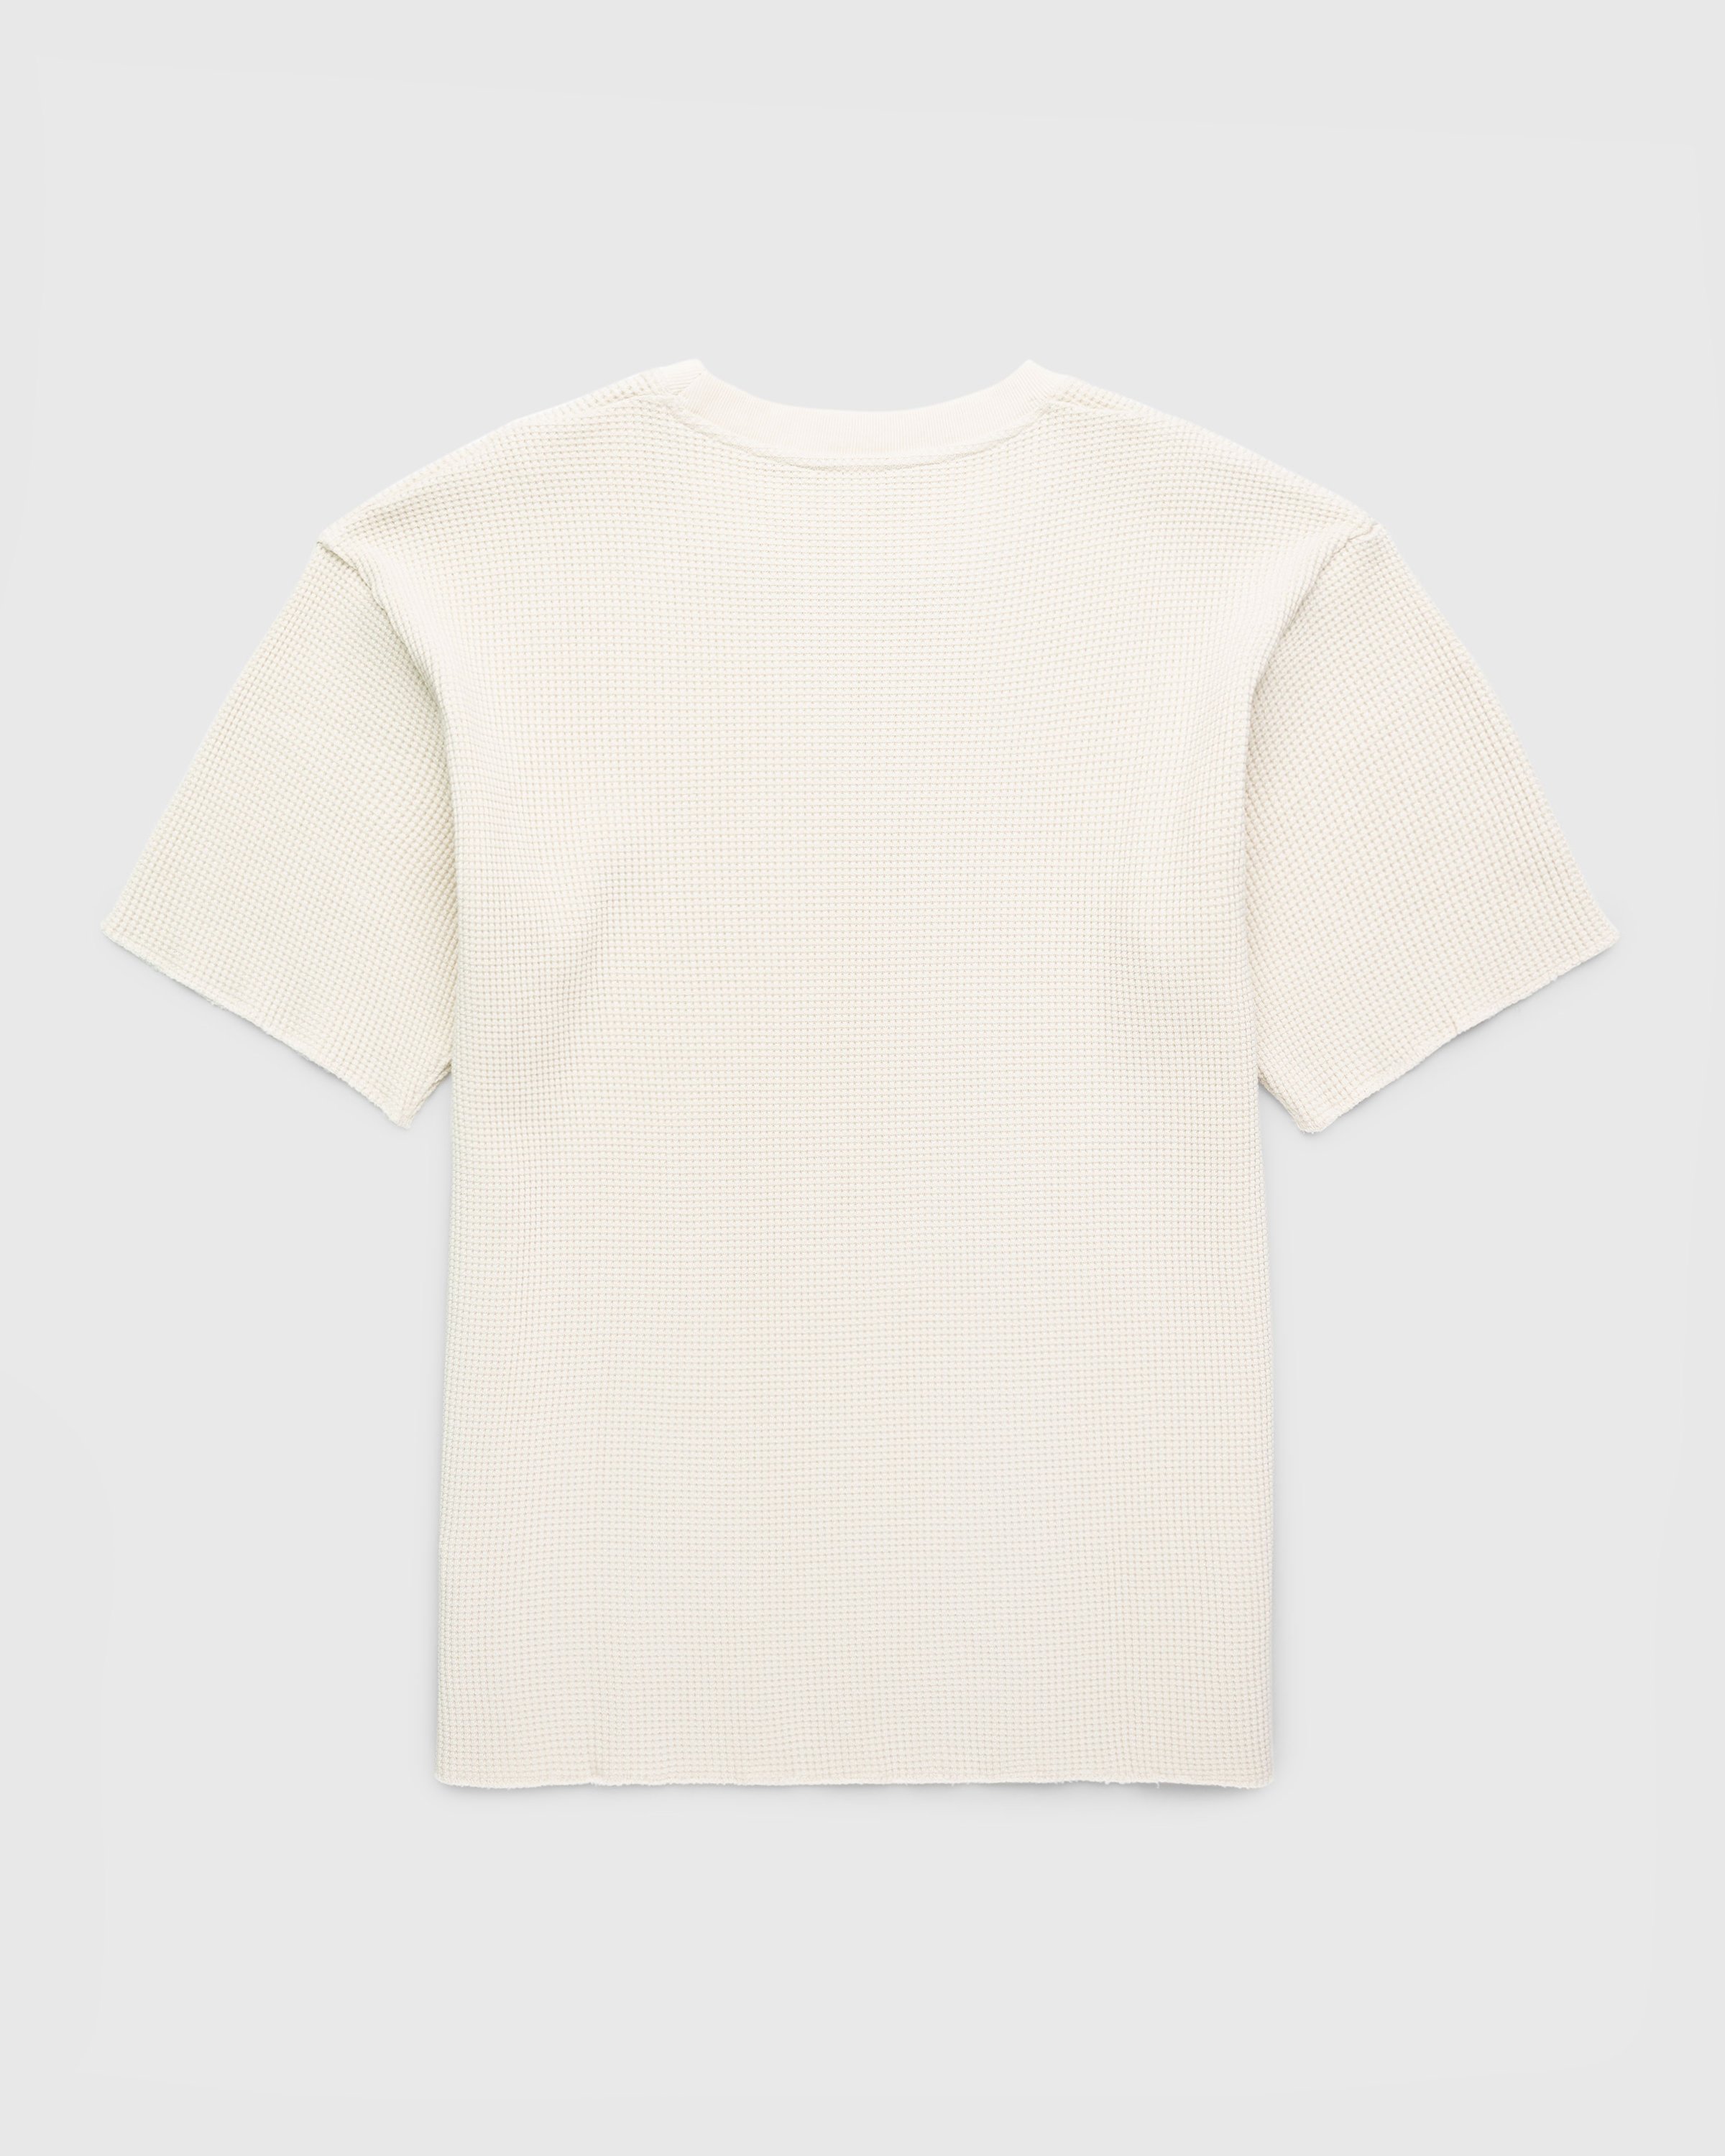 Highsnobiety HS05 - Thermal Short Sleeve Natural - Clothing - Beige - Image 2